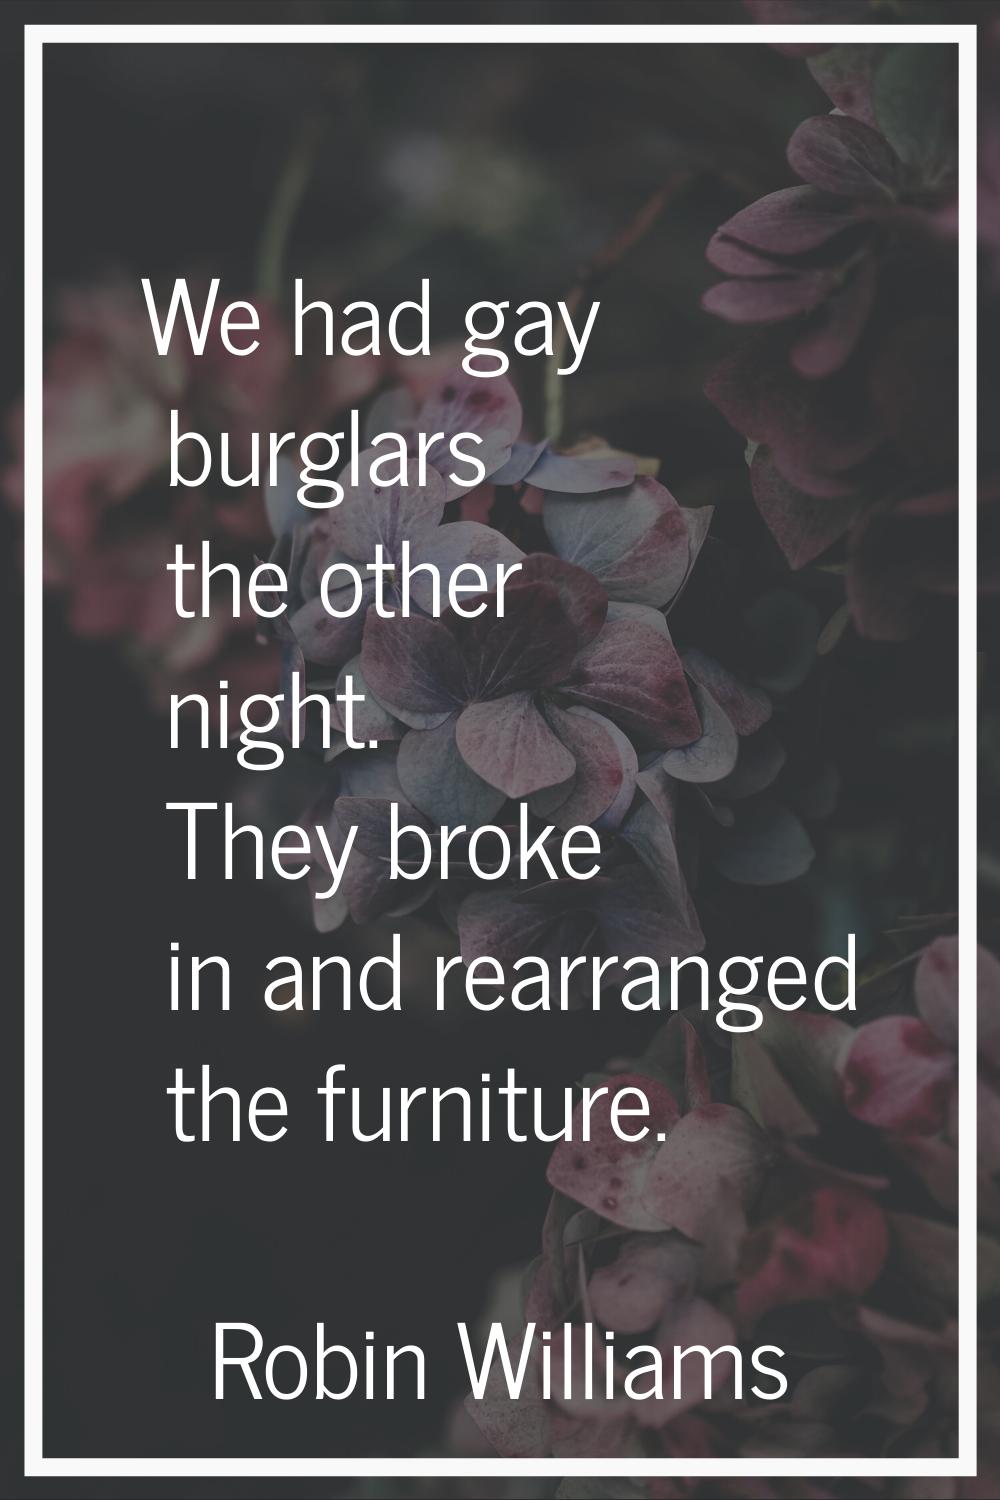 We had gay burglars the other night. They broke in and rearranged the furniture.